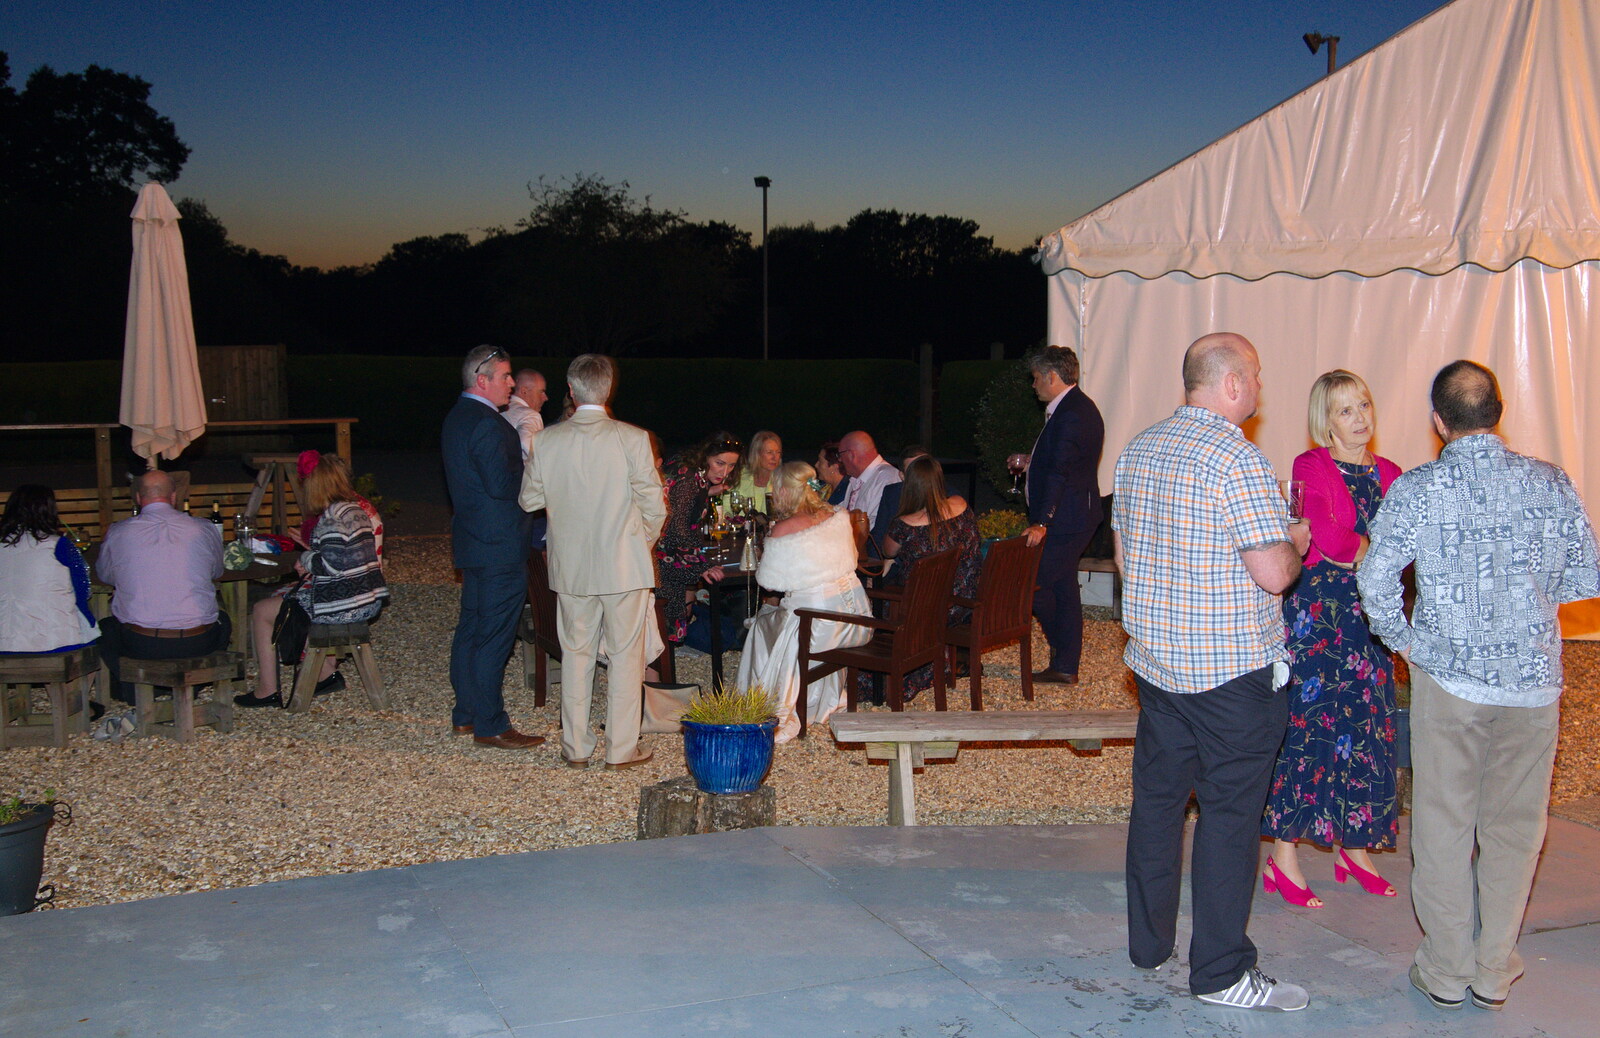 Mingling in the gathering dusk from Neil and Martina's Wedding, The Three Tuns, Bransgore, Dorset - 20th September 2019